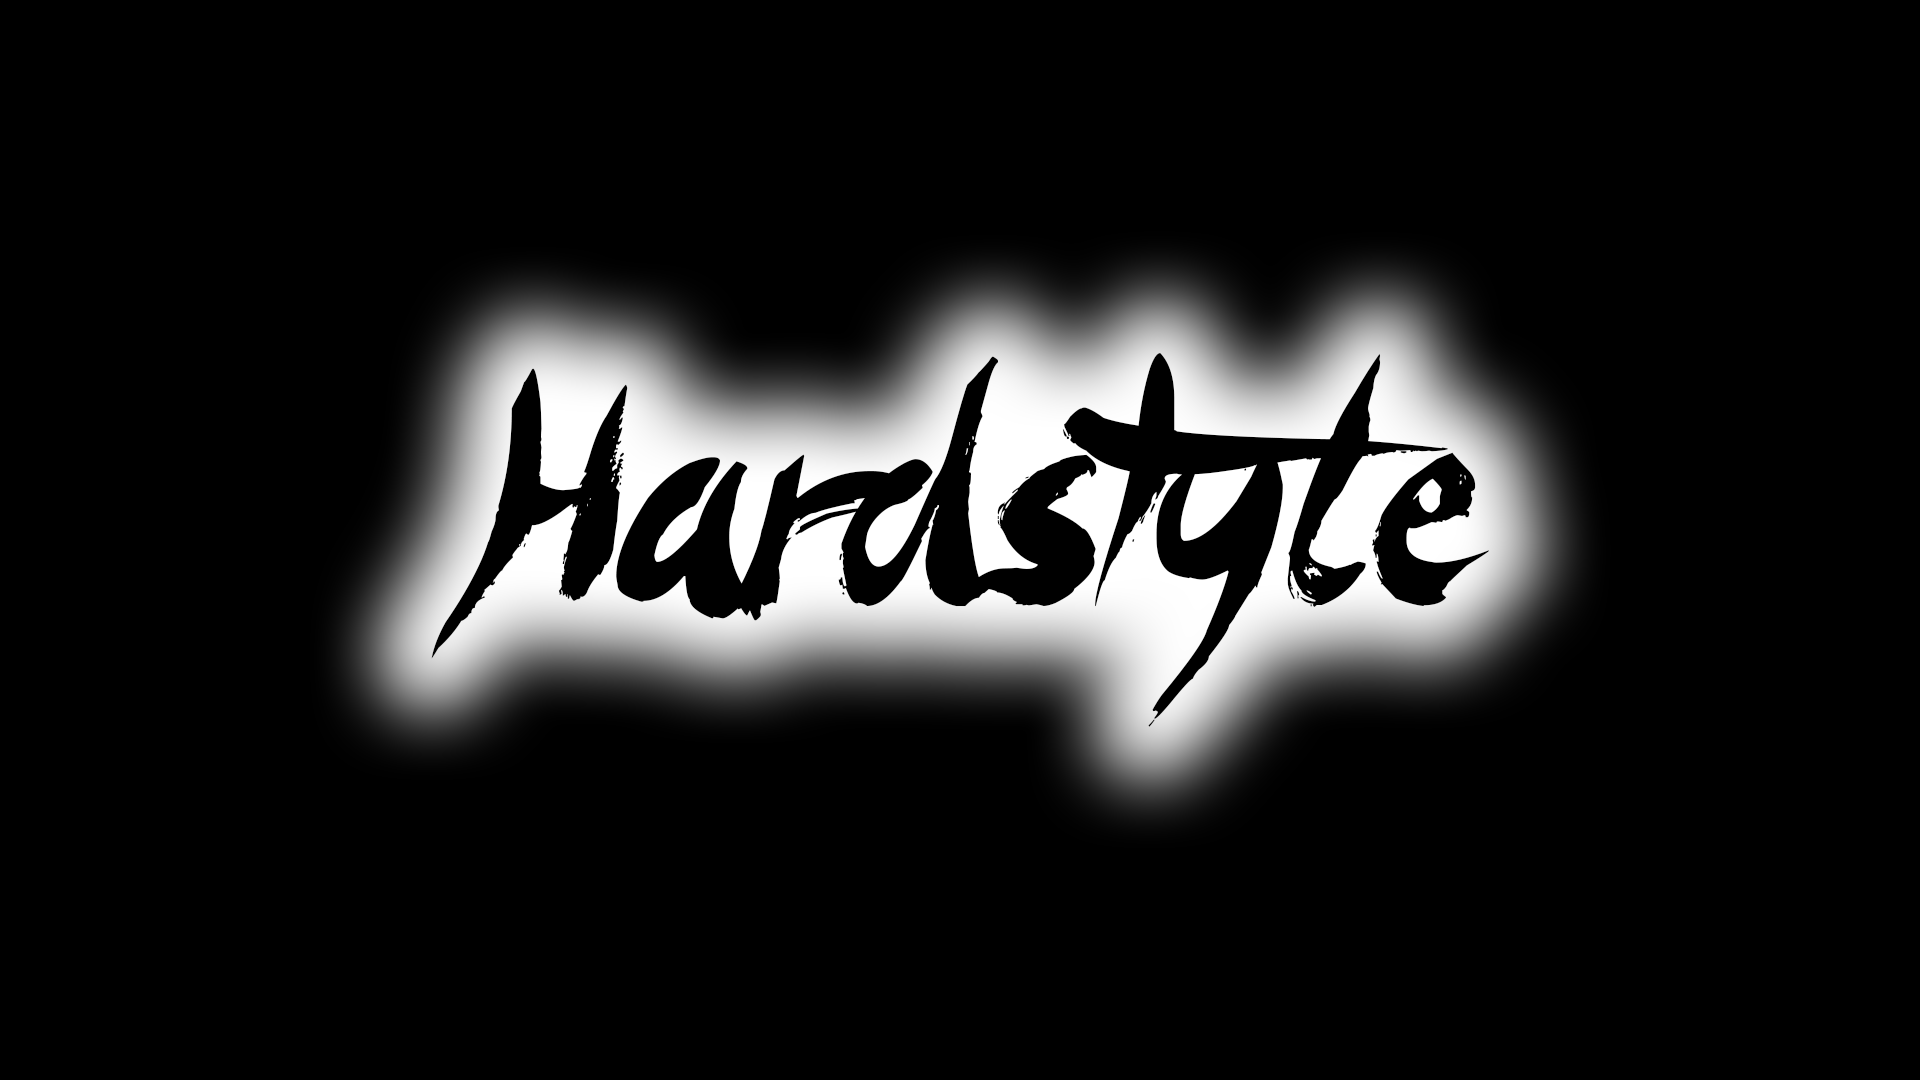 Hardstyle Full HD Wallpaper and Background Imagex1080